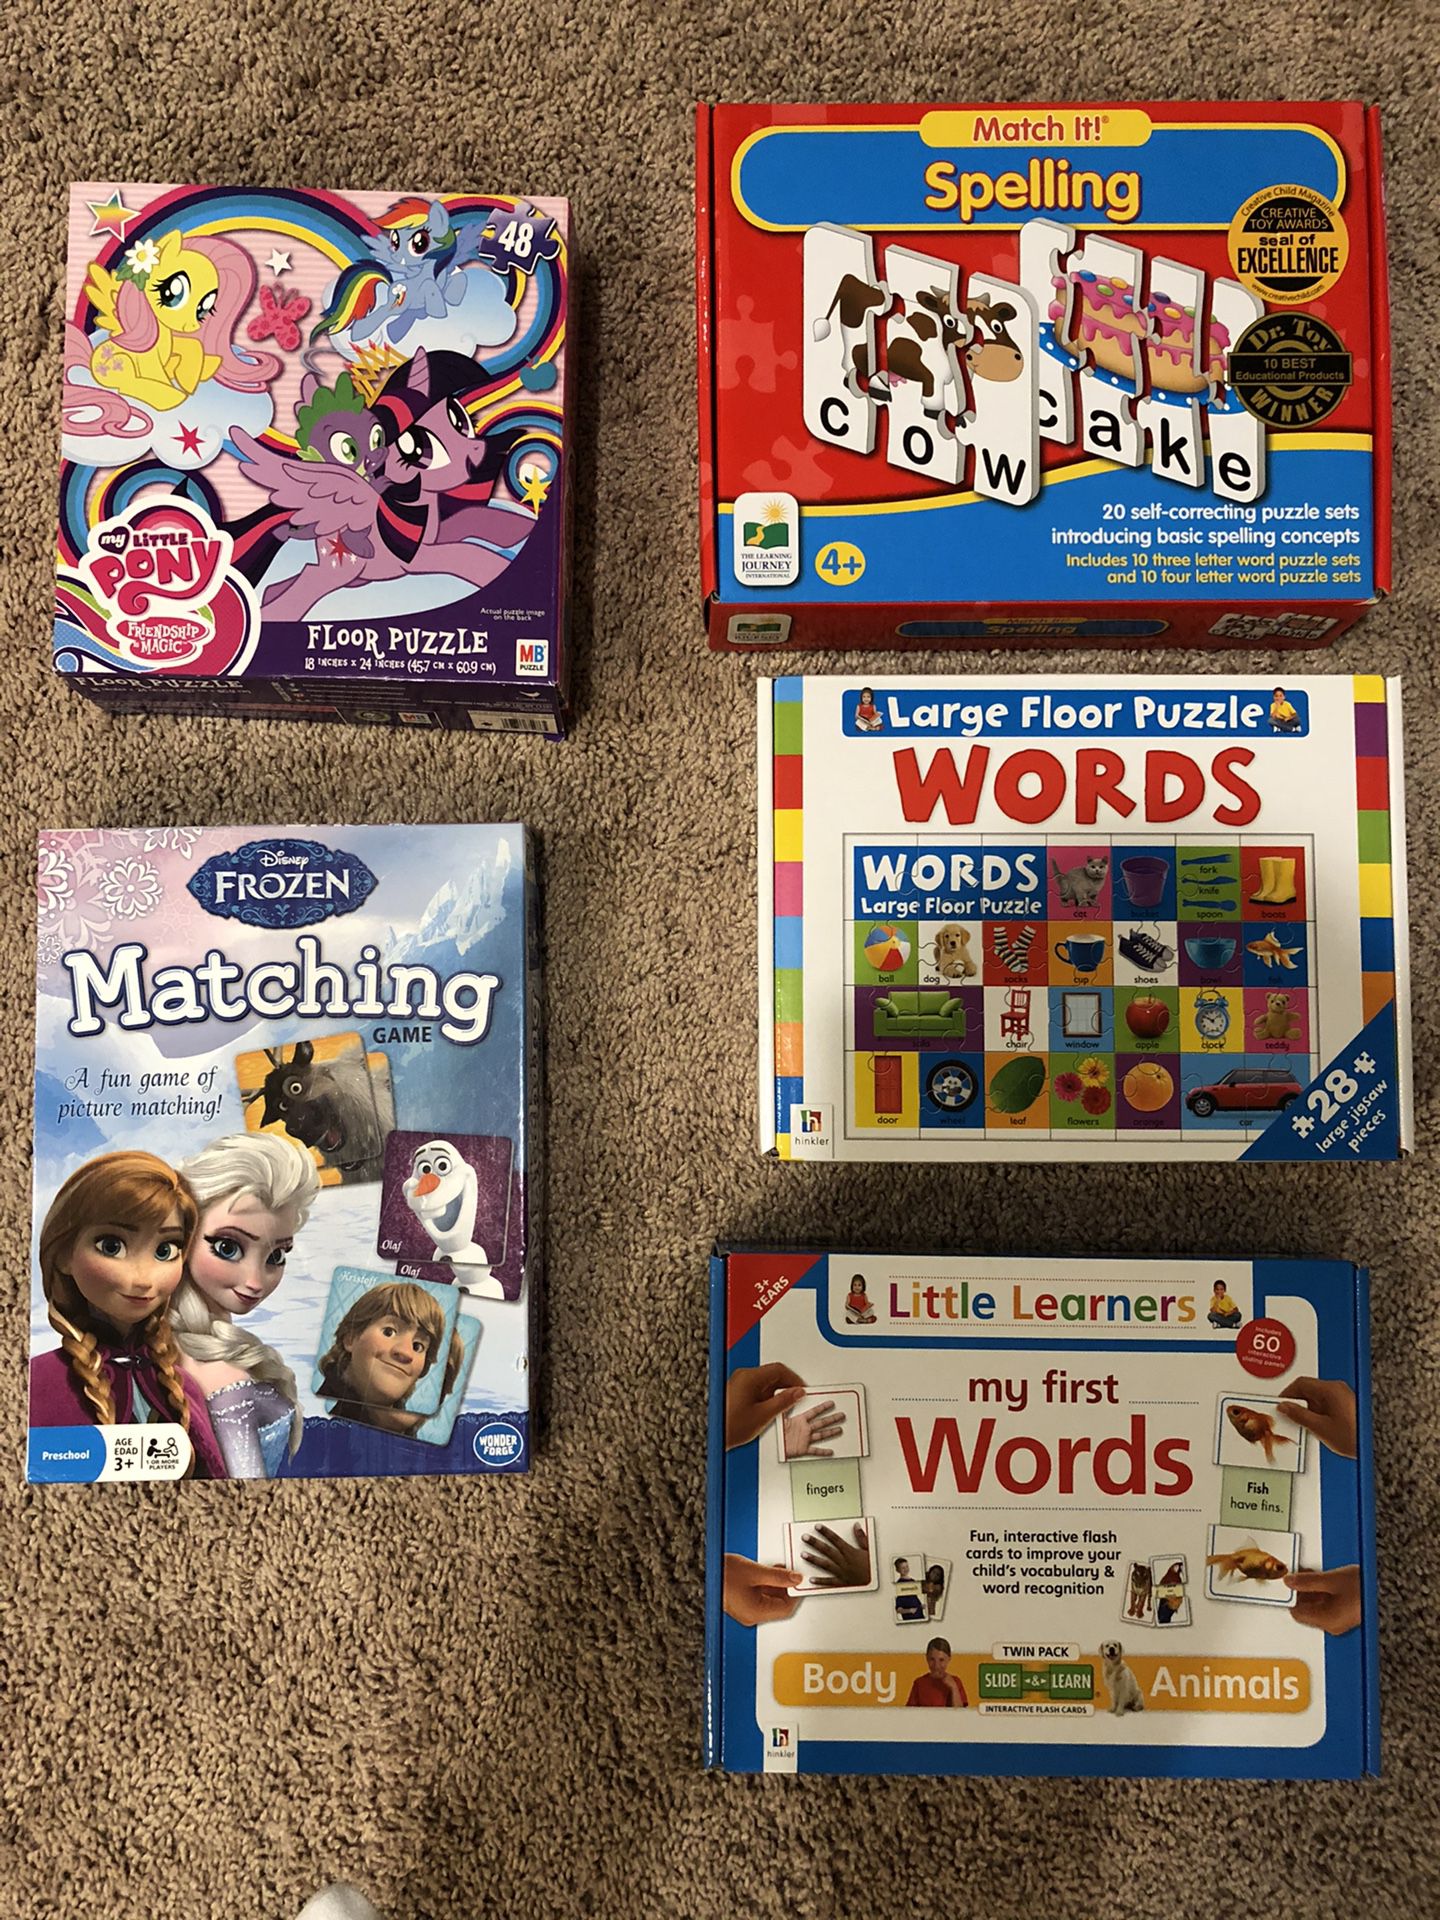 Sight words game, puzzles, Frozen memory match game